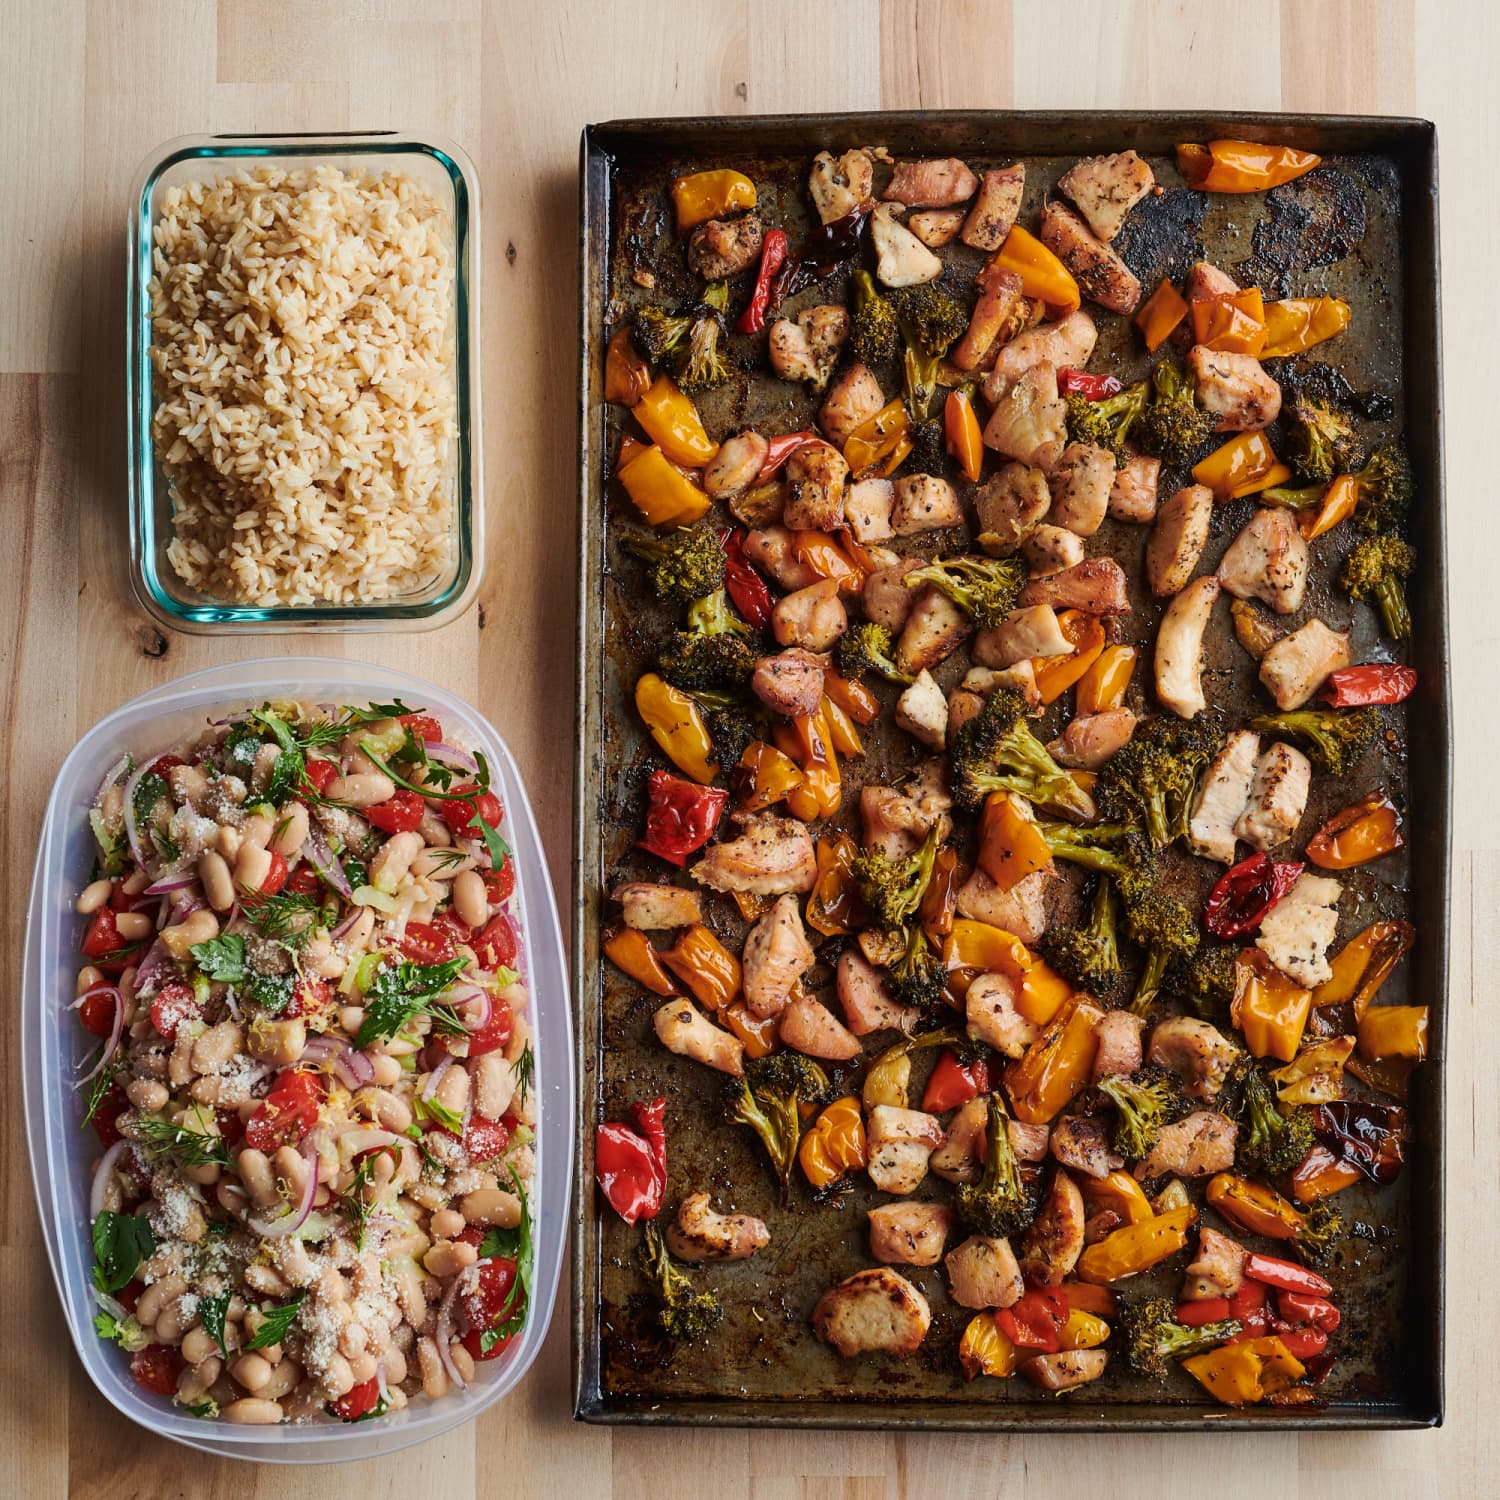 Made Simple Meal Prep: Plan - Shop - Cook. Recipes and Tips to